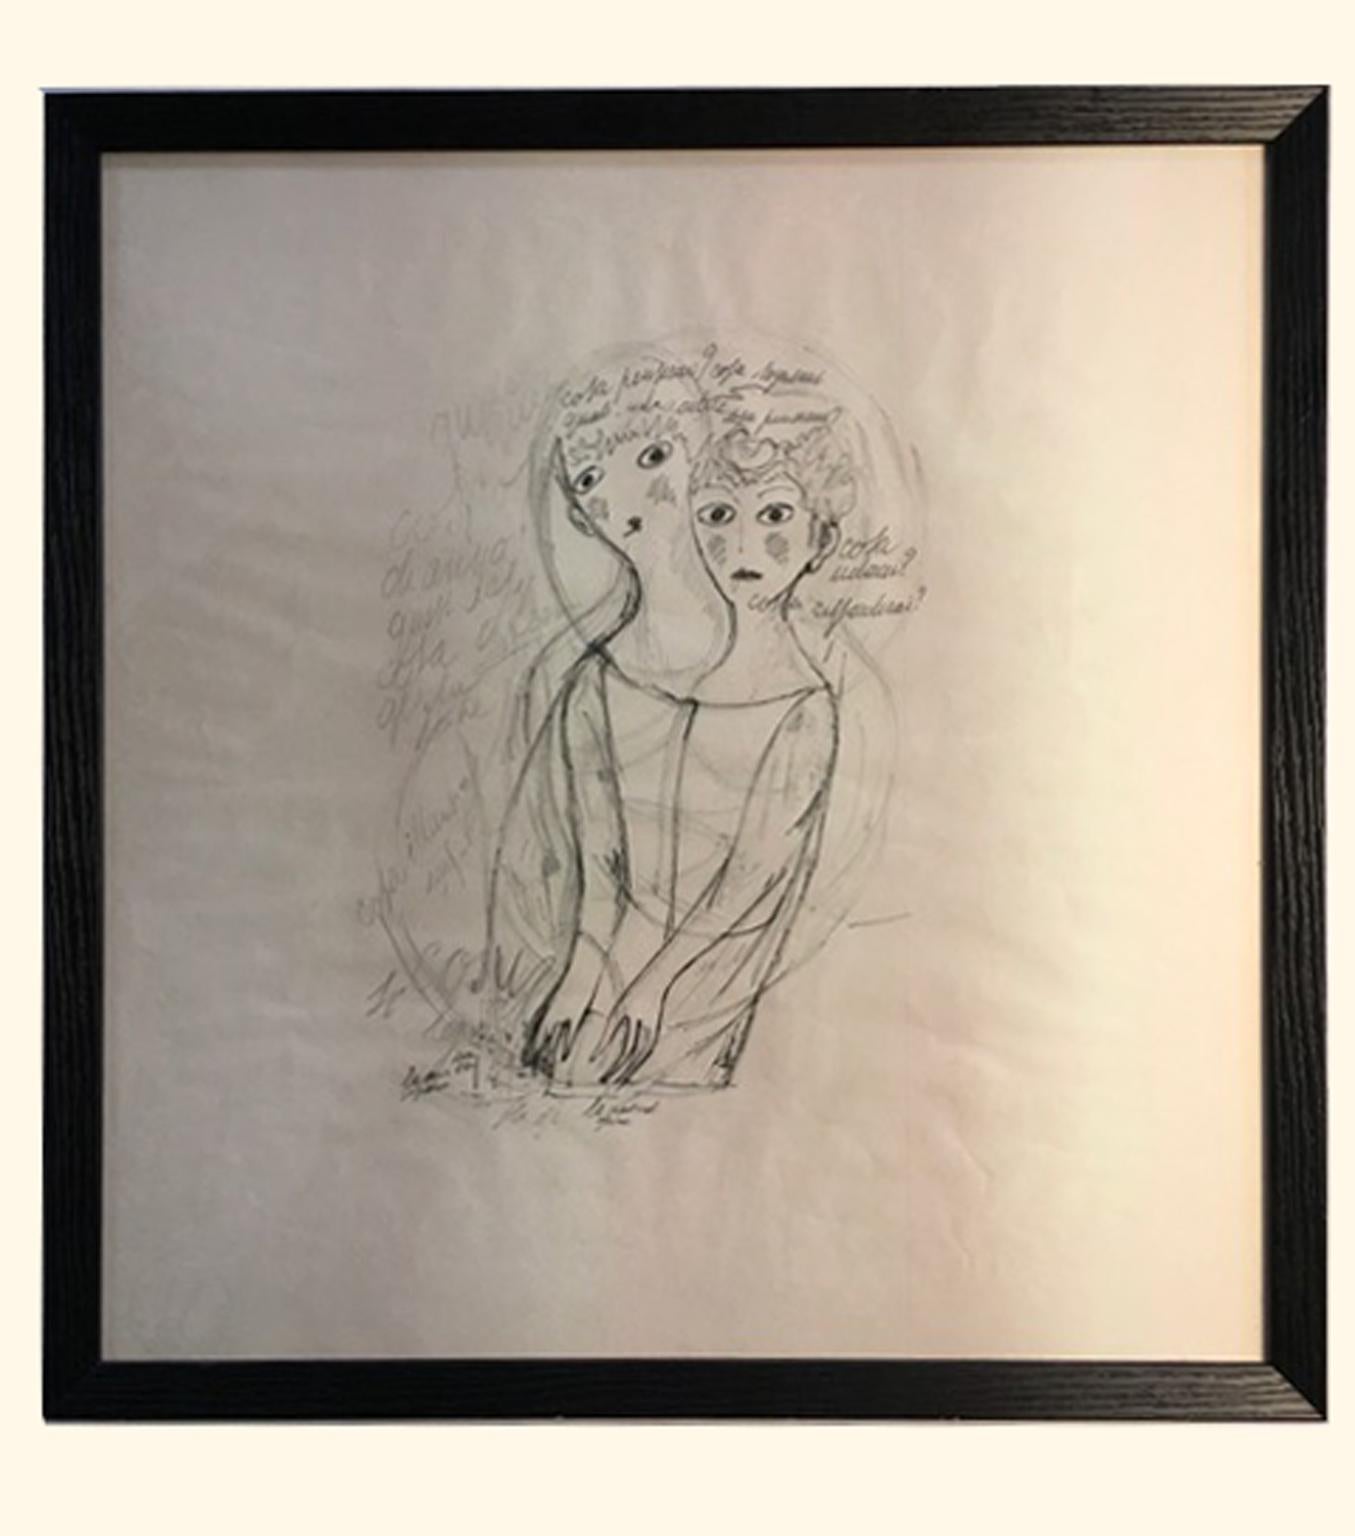 Gio Ponti was an eclectical Italian architecty who represents the Mid-Century Modern Italian style in the world.

This is a delicate portrait of two females, and shows an unknown side of the Italian Master.

It's visible in the corner, on the